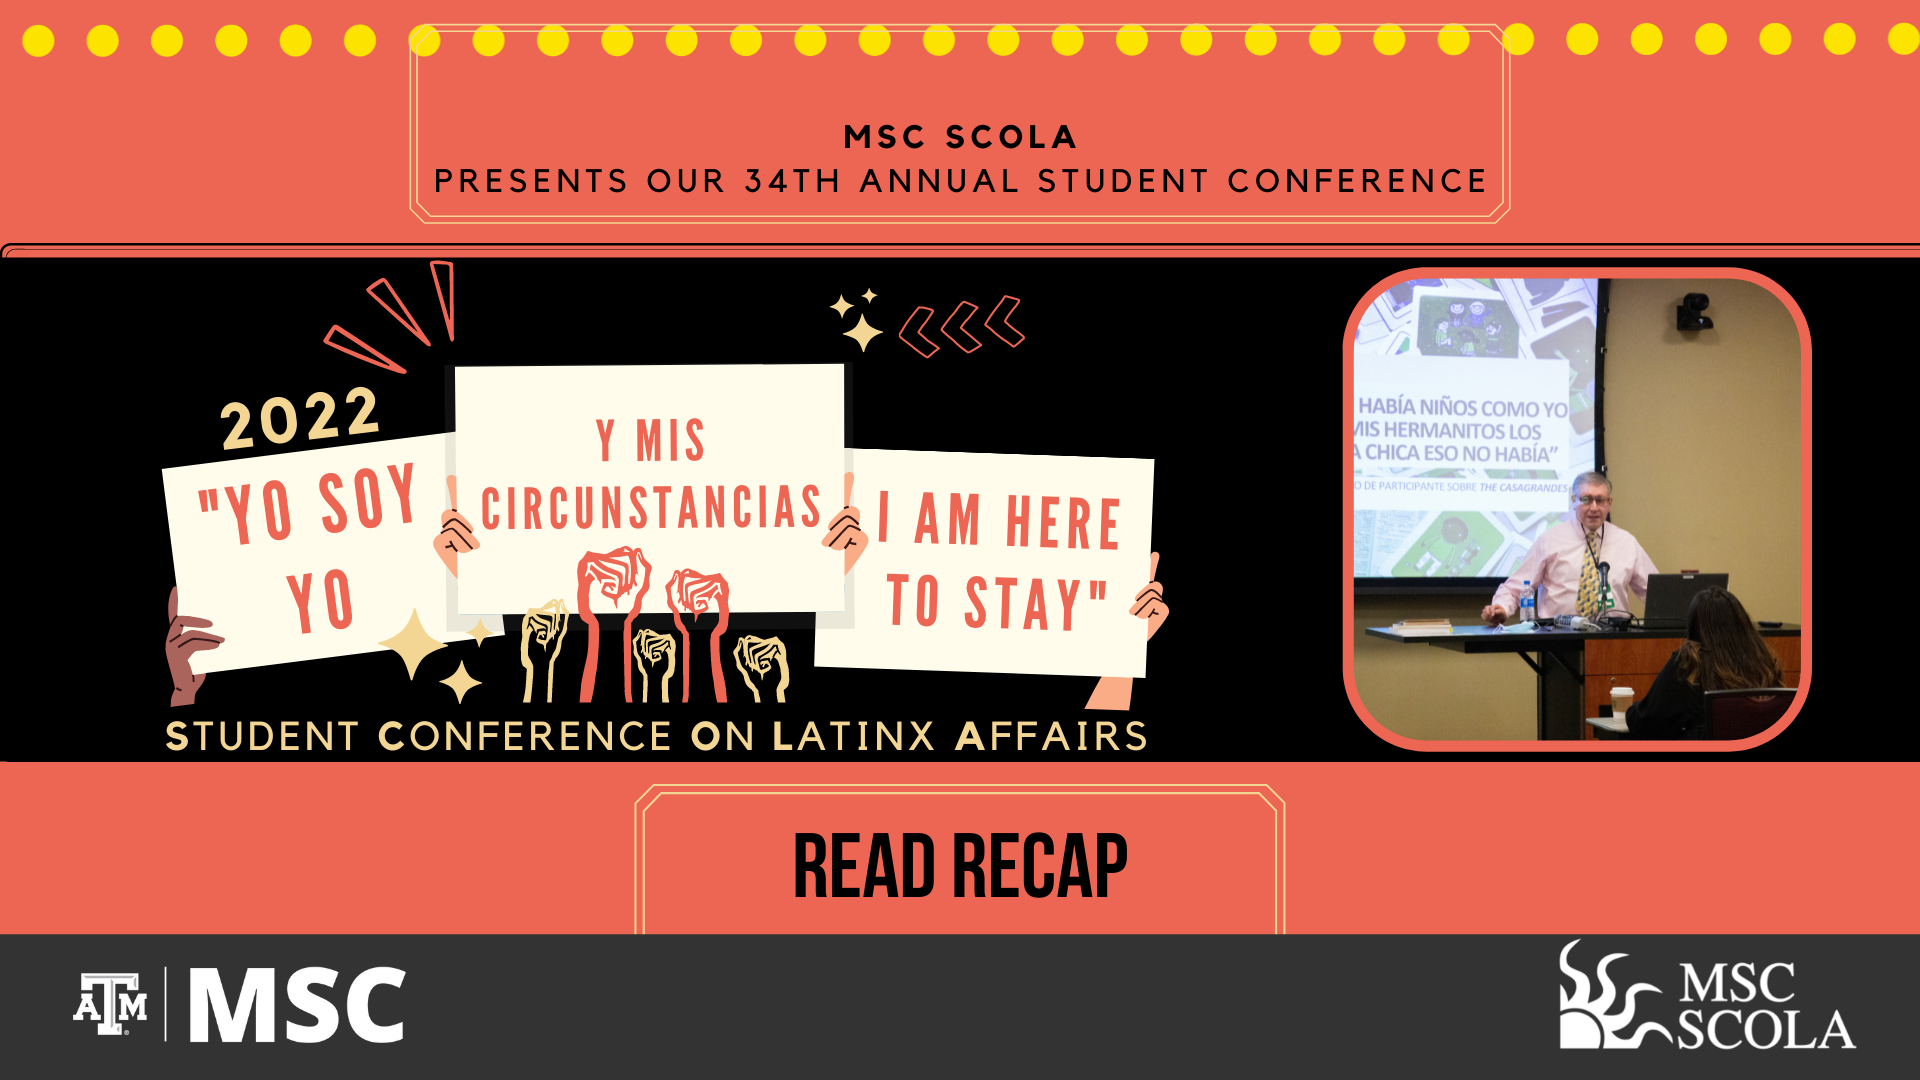 MSC SCOLA Presents 34th Annual Student Conference 2022: Yo soy yo y mis circumstancias, I am here to stay. Read Recap